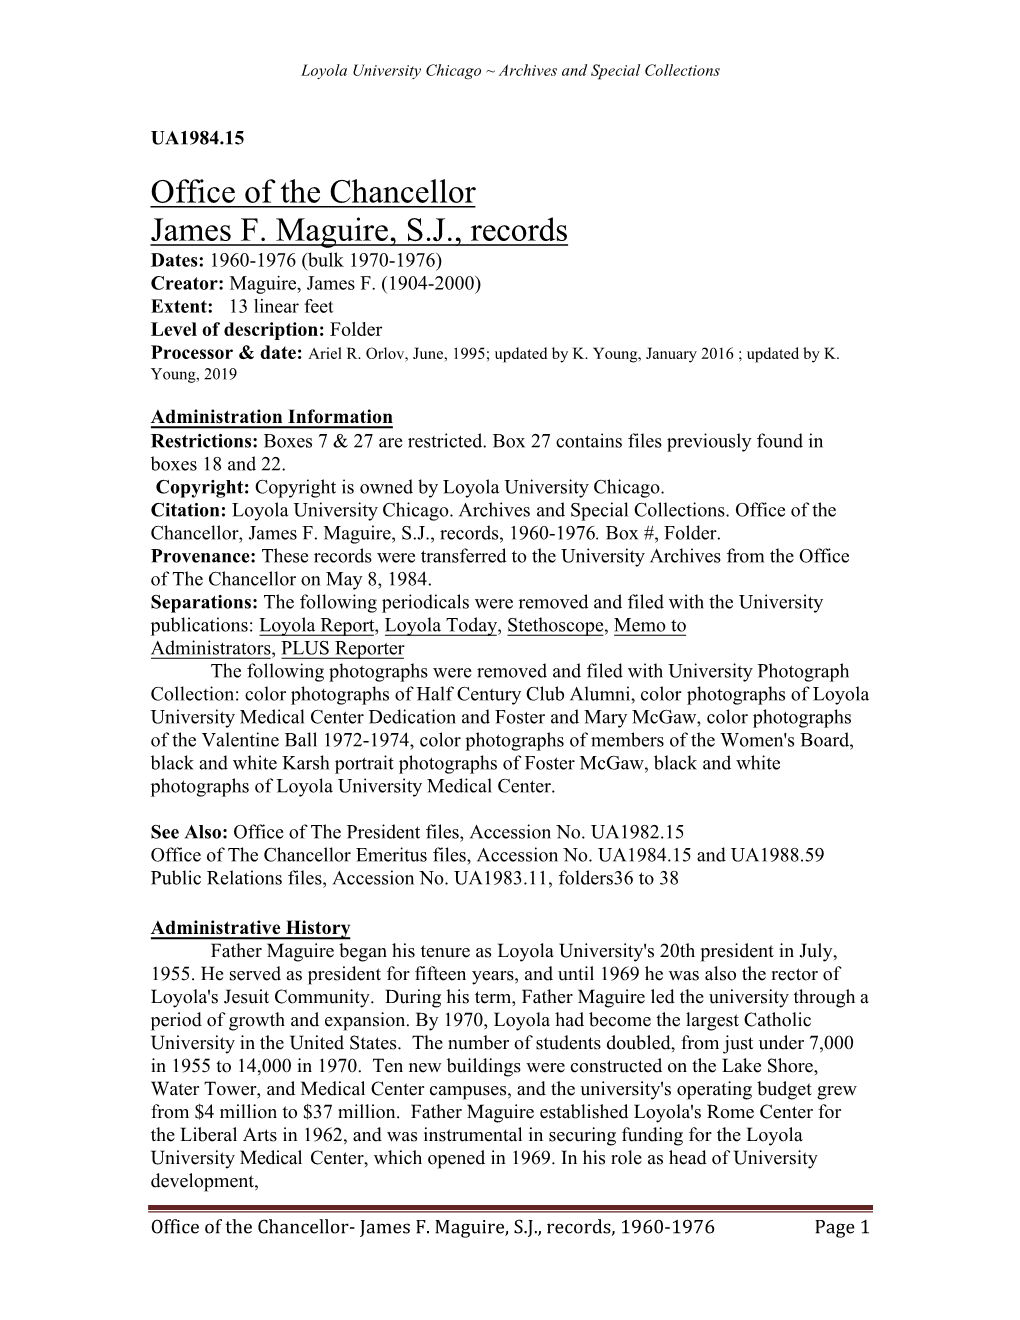 Office of the Chancellor: James F. Maguire, SJ, Records, 1960-1976